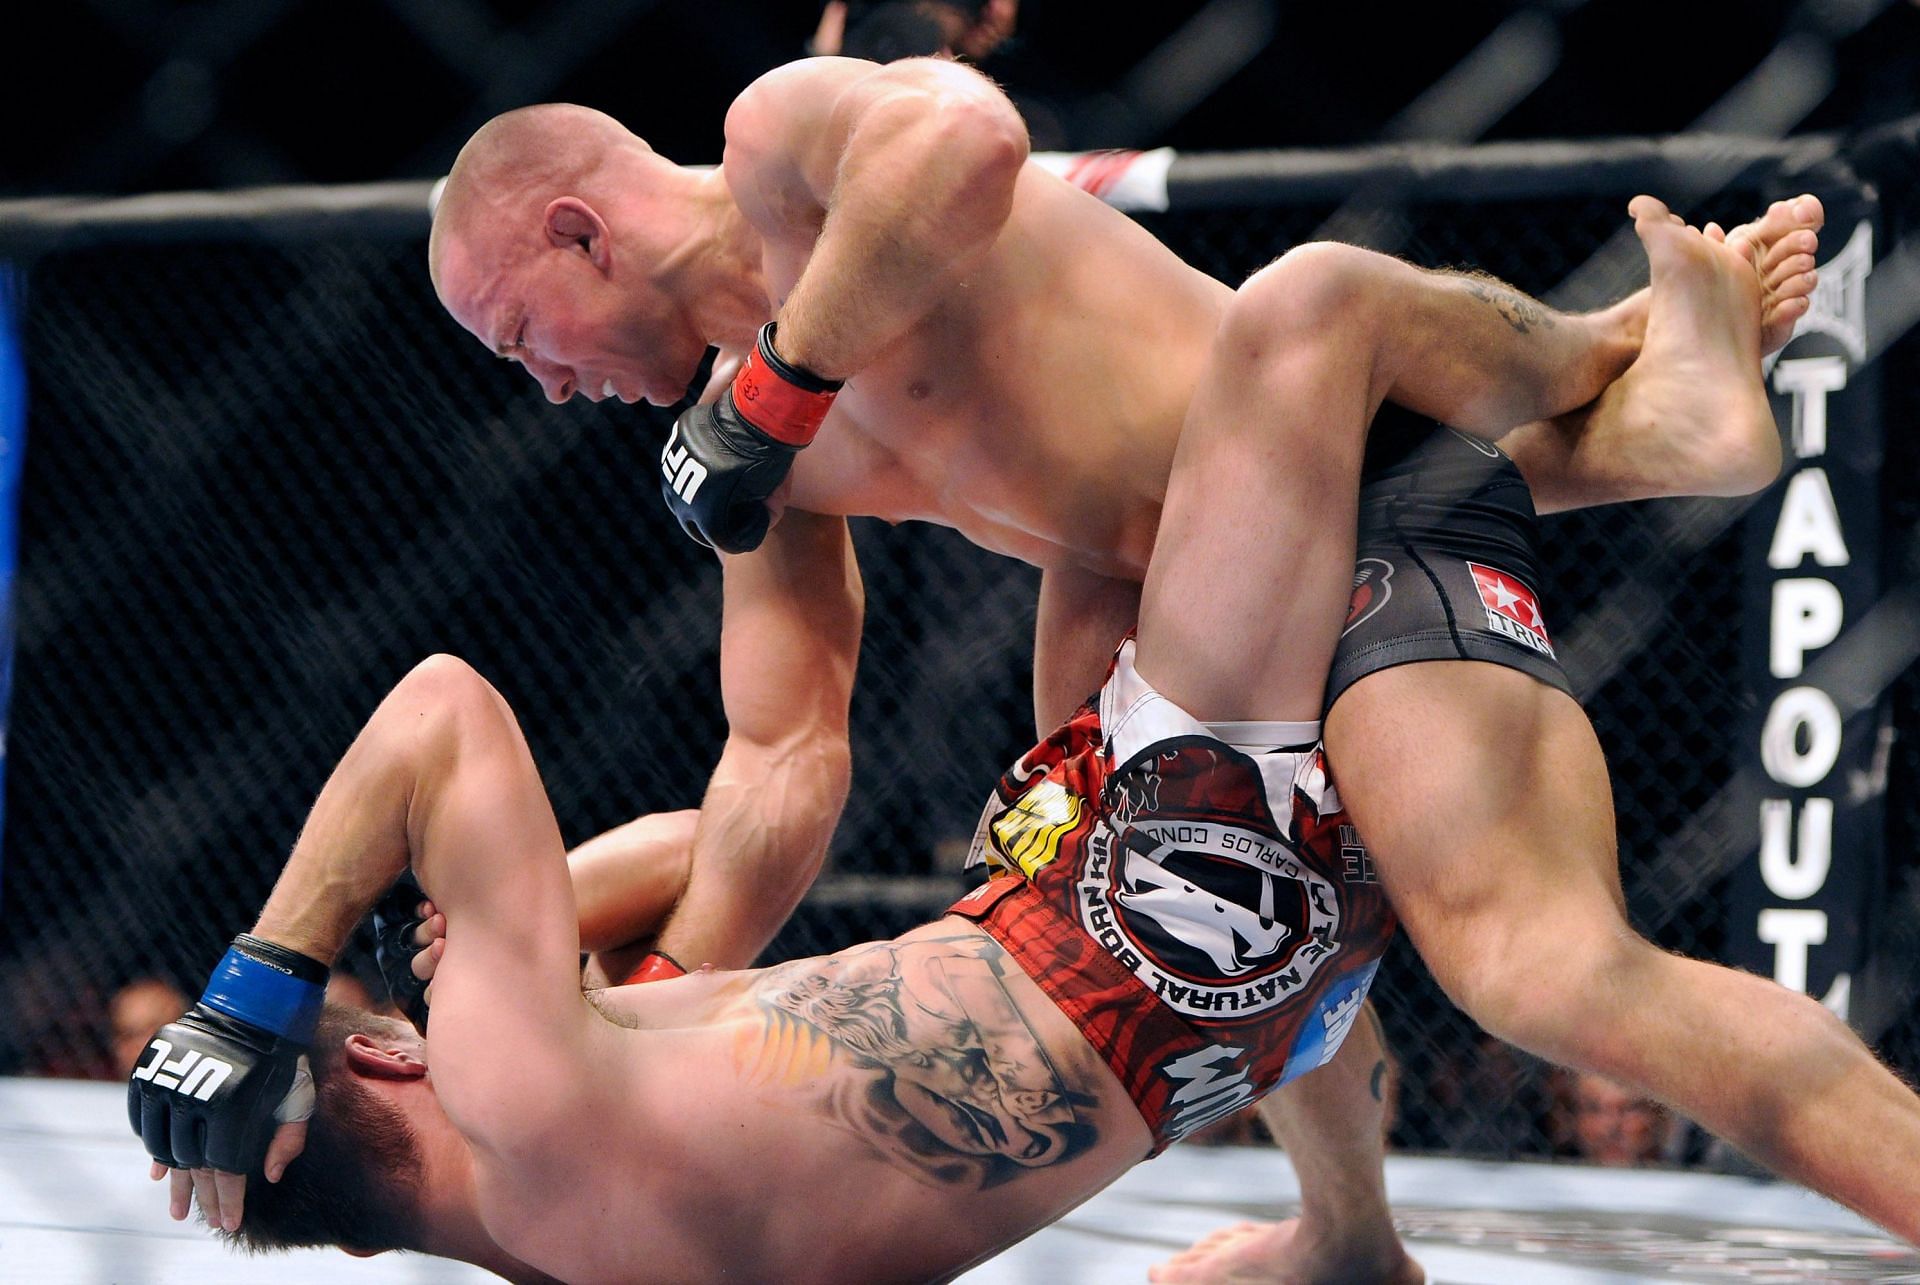 Georges St-Pierre&#039;s comeback fight saw him edge out Carlos Condit in a thriller